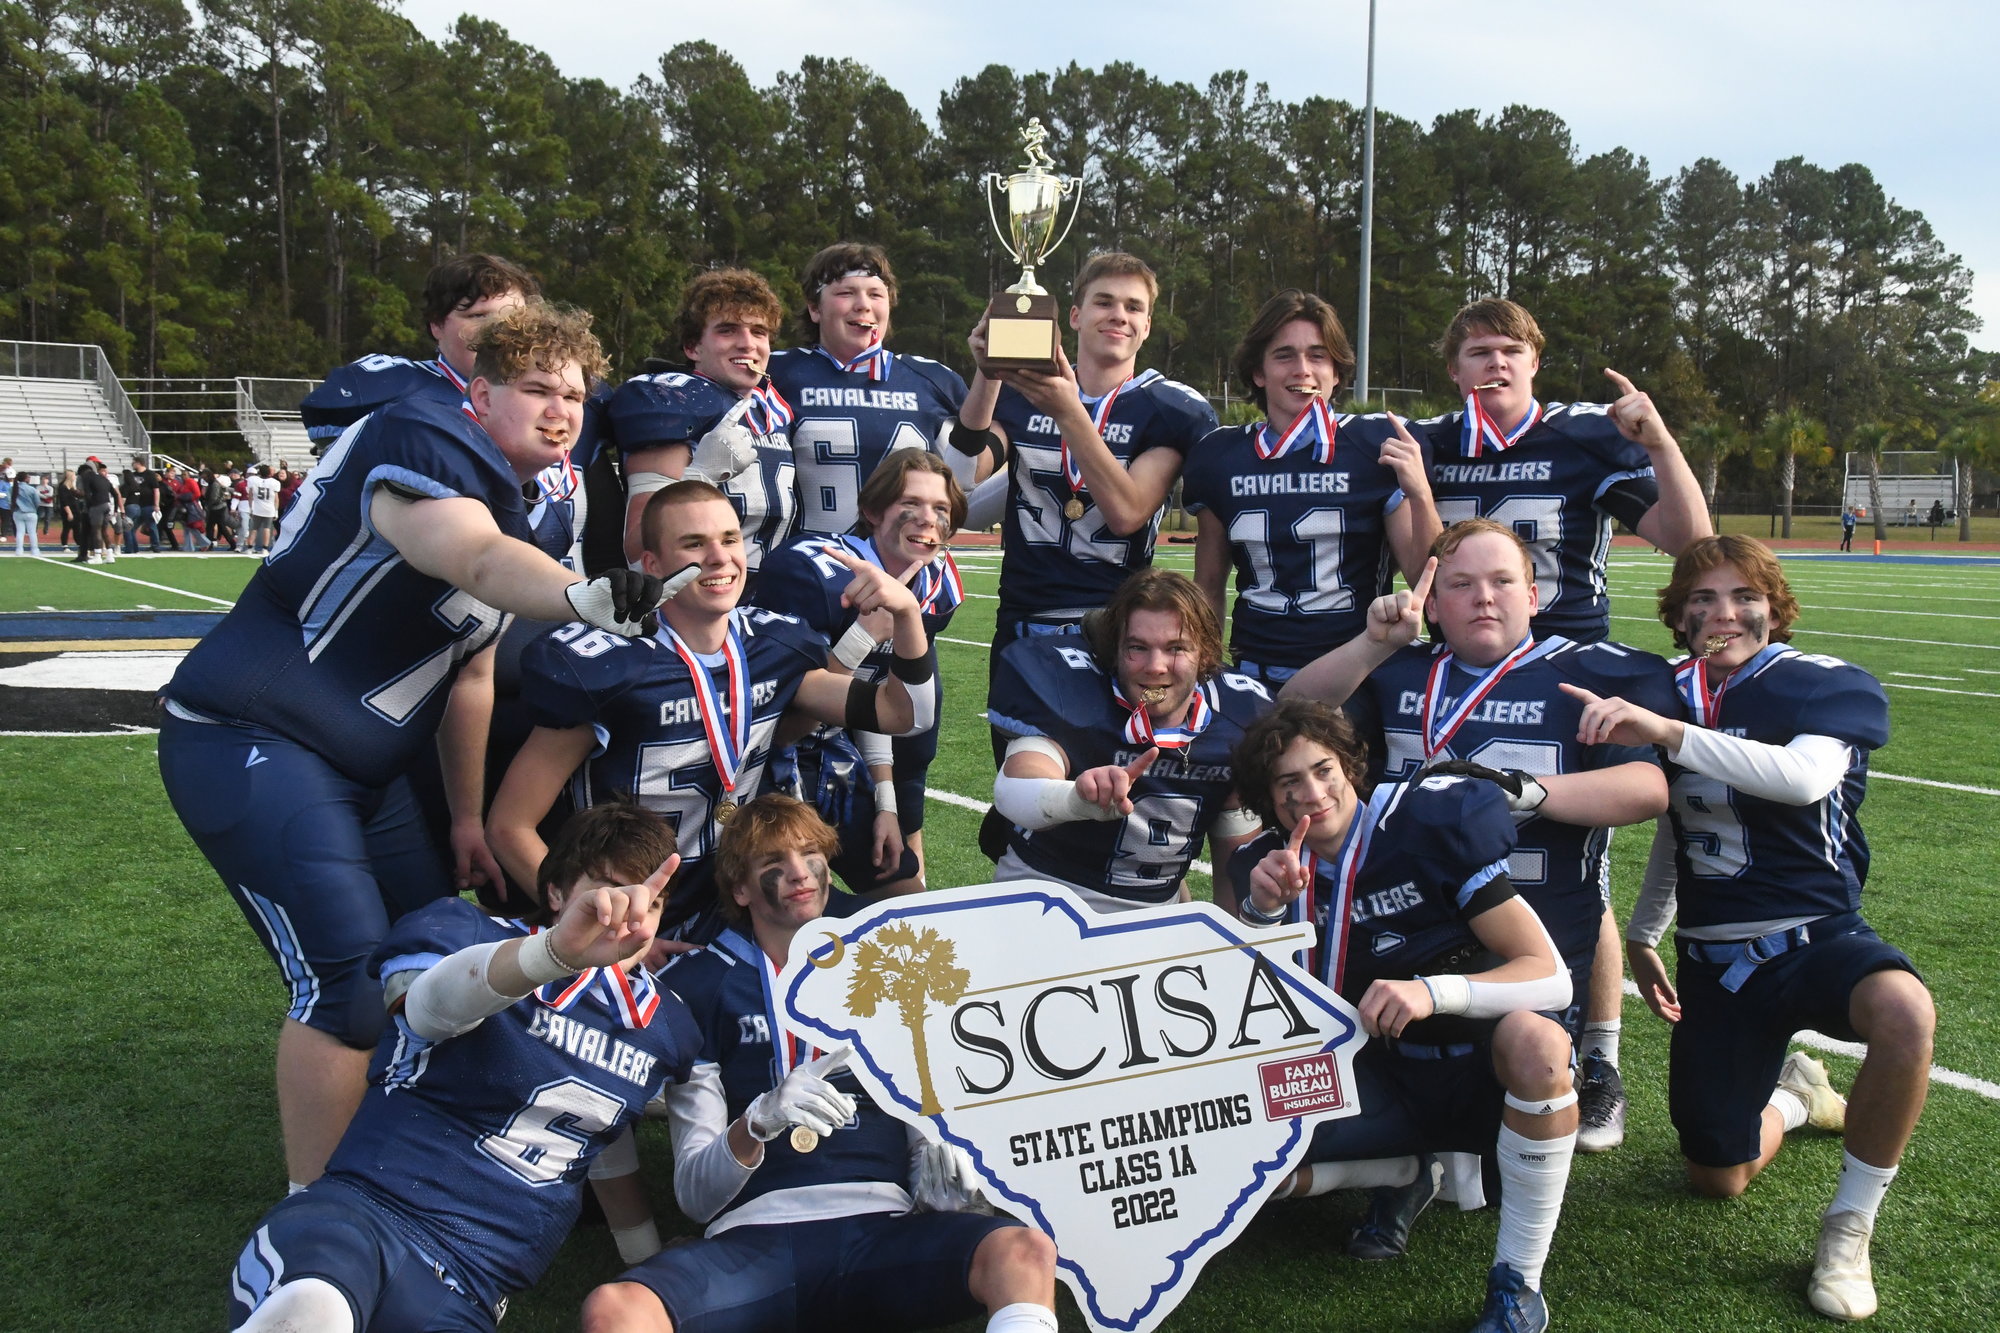 Finally champions: Lee Academy wins with physicality in 28-0 rout of Thomas  Heyward for SCISA 1A title | The Sumter Item